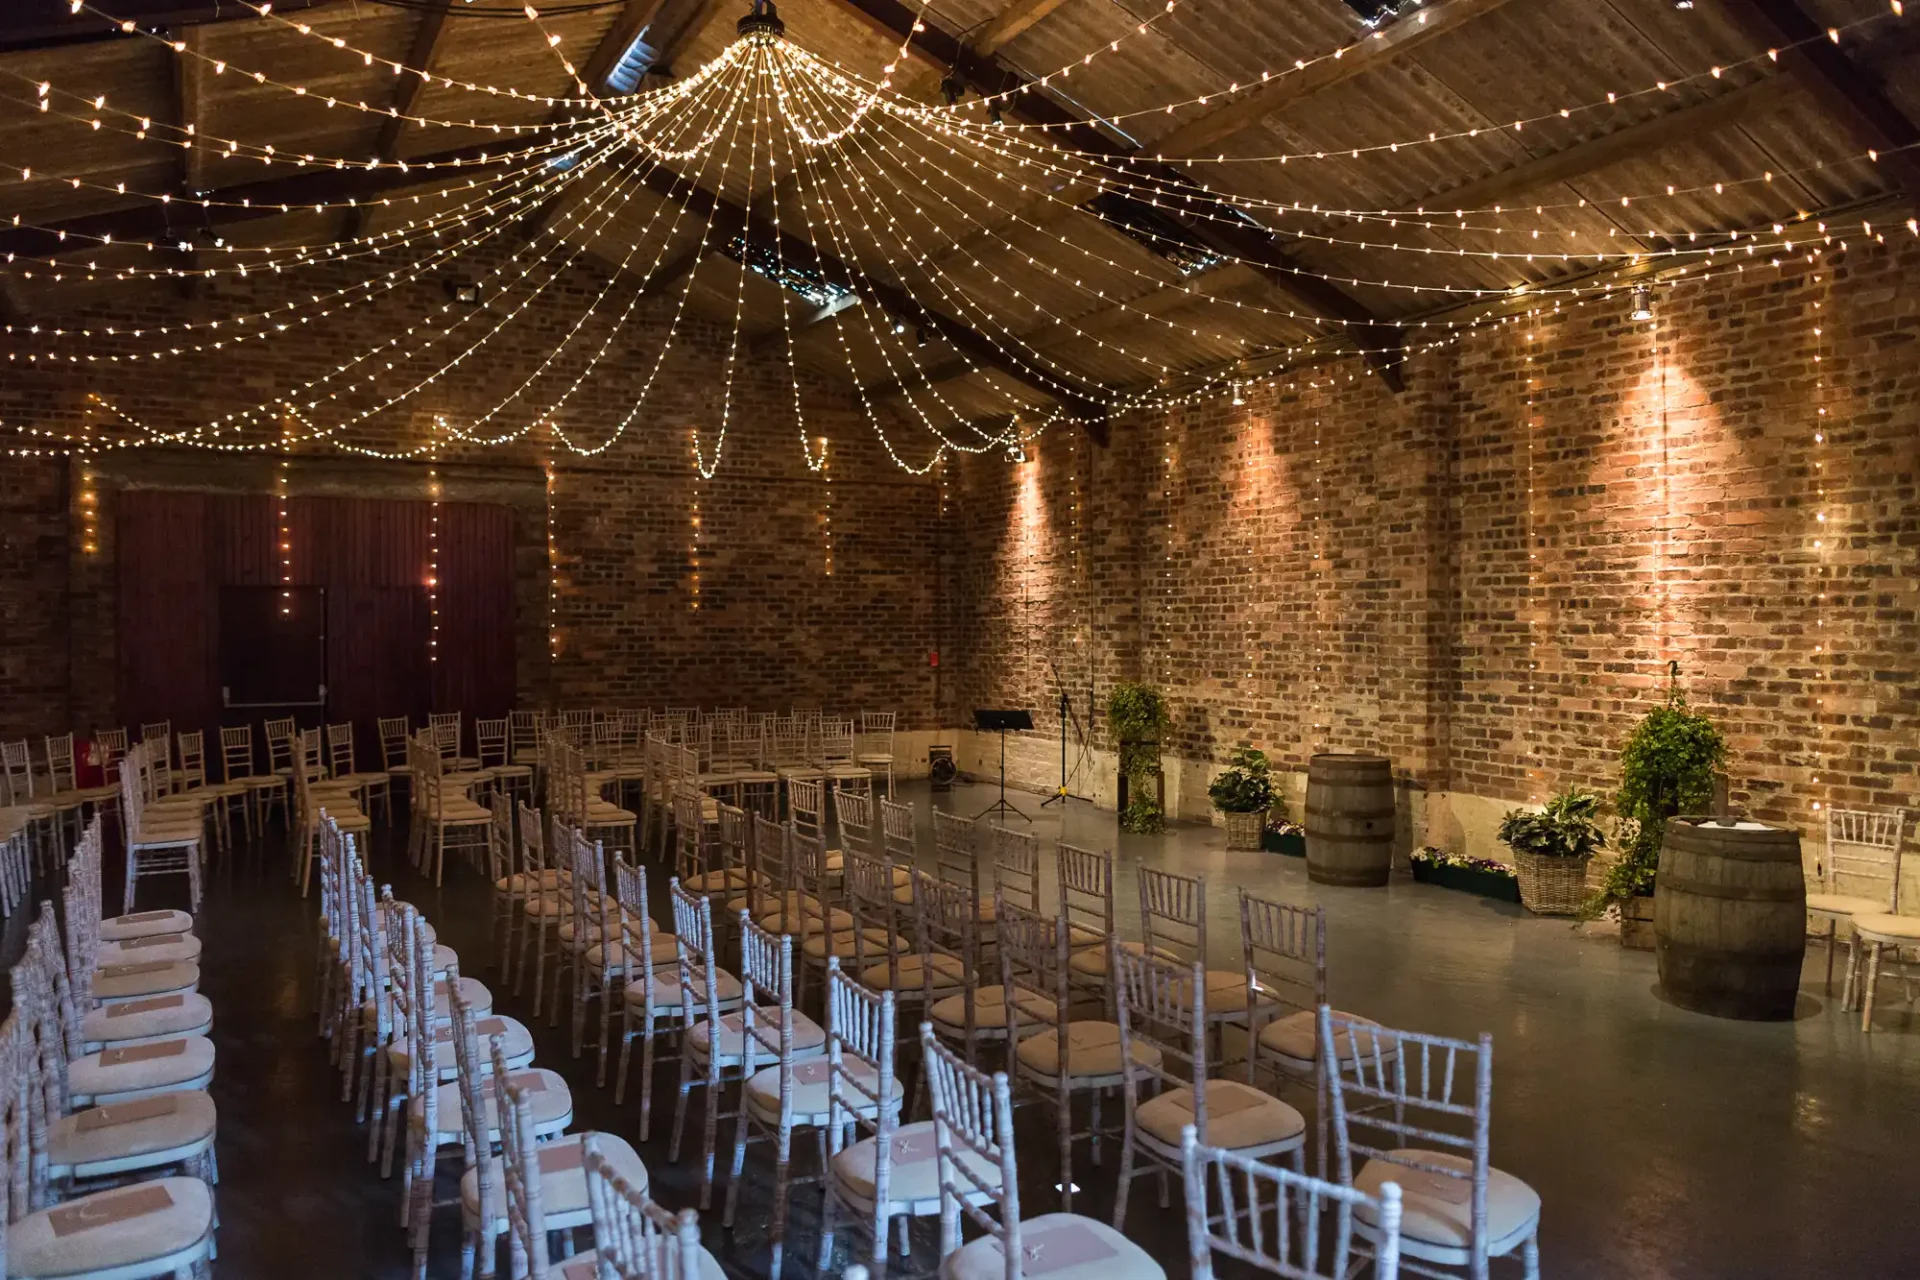 Rustic event space with exposed brick walls, draped string lights and arranged white chairs facing a central aisle.